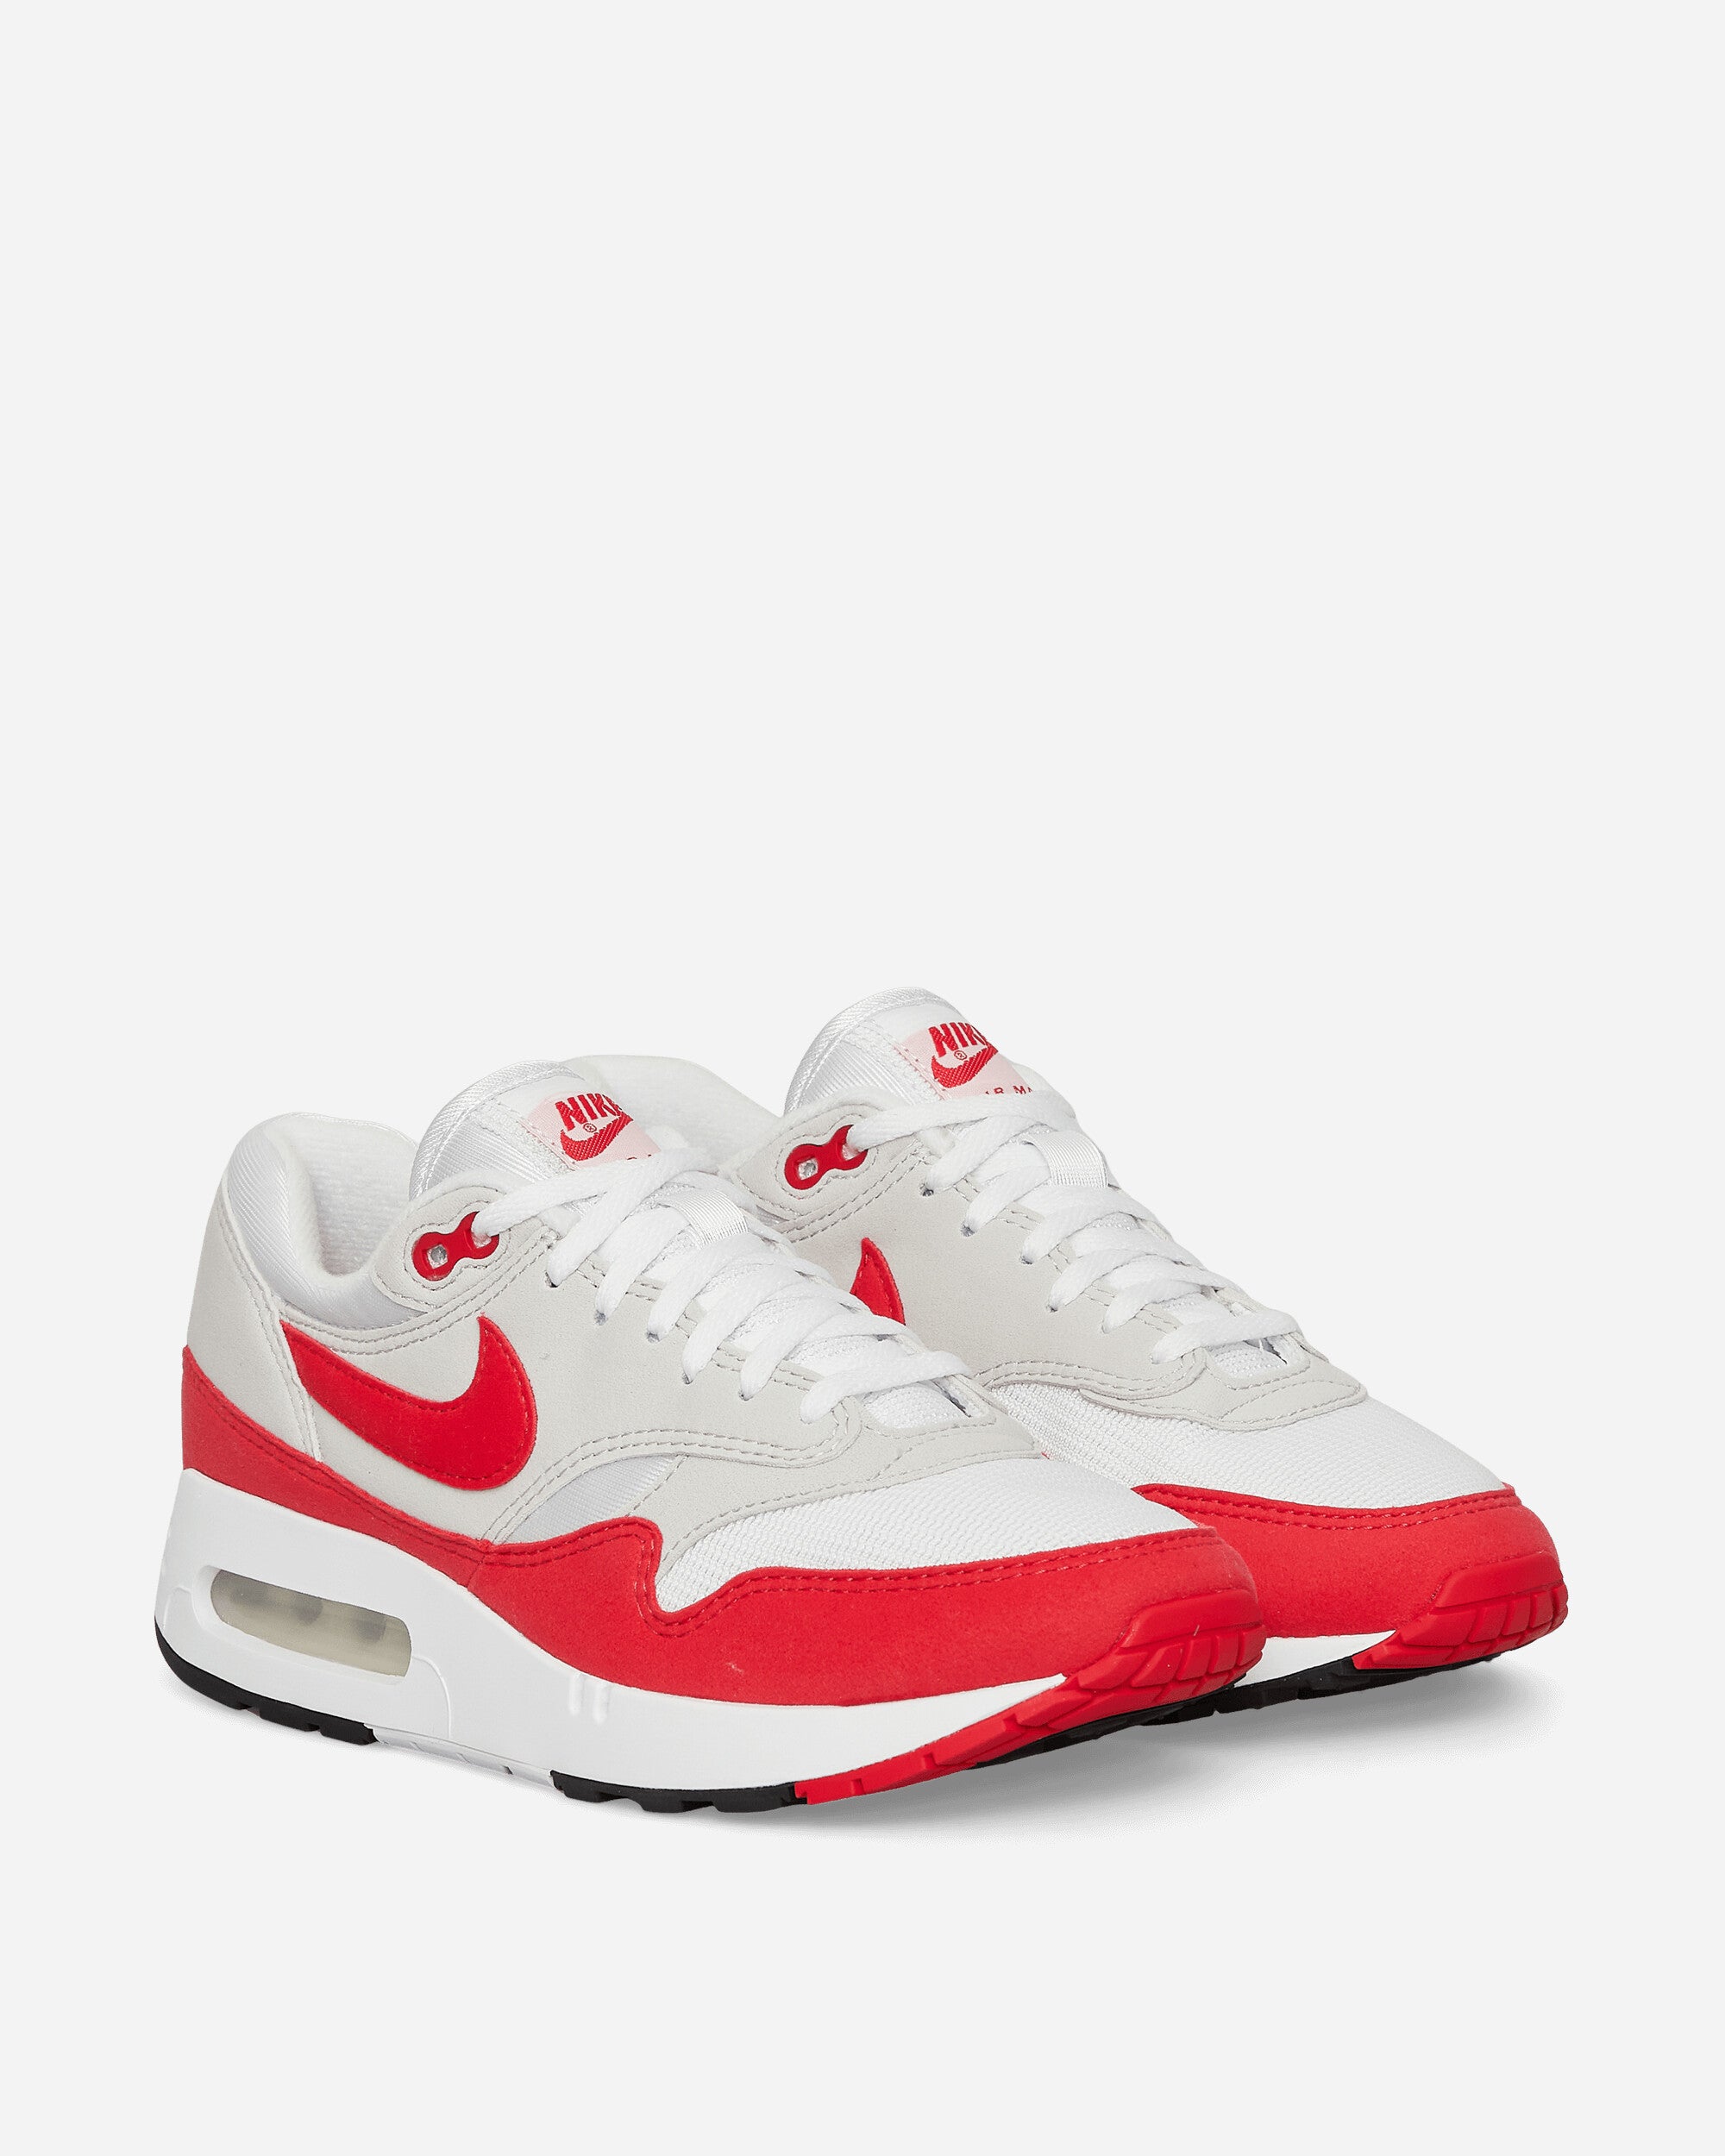 Nike Wmns Nike Air Max 1 86 Og White/University Red Sneakers Low DO9844-100